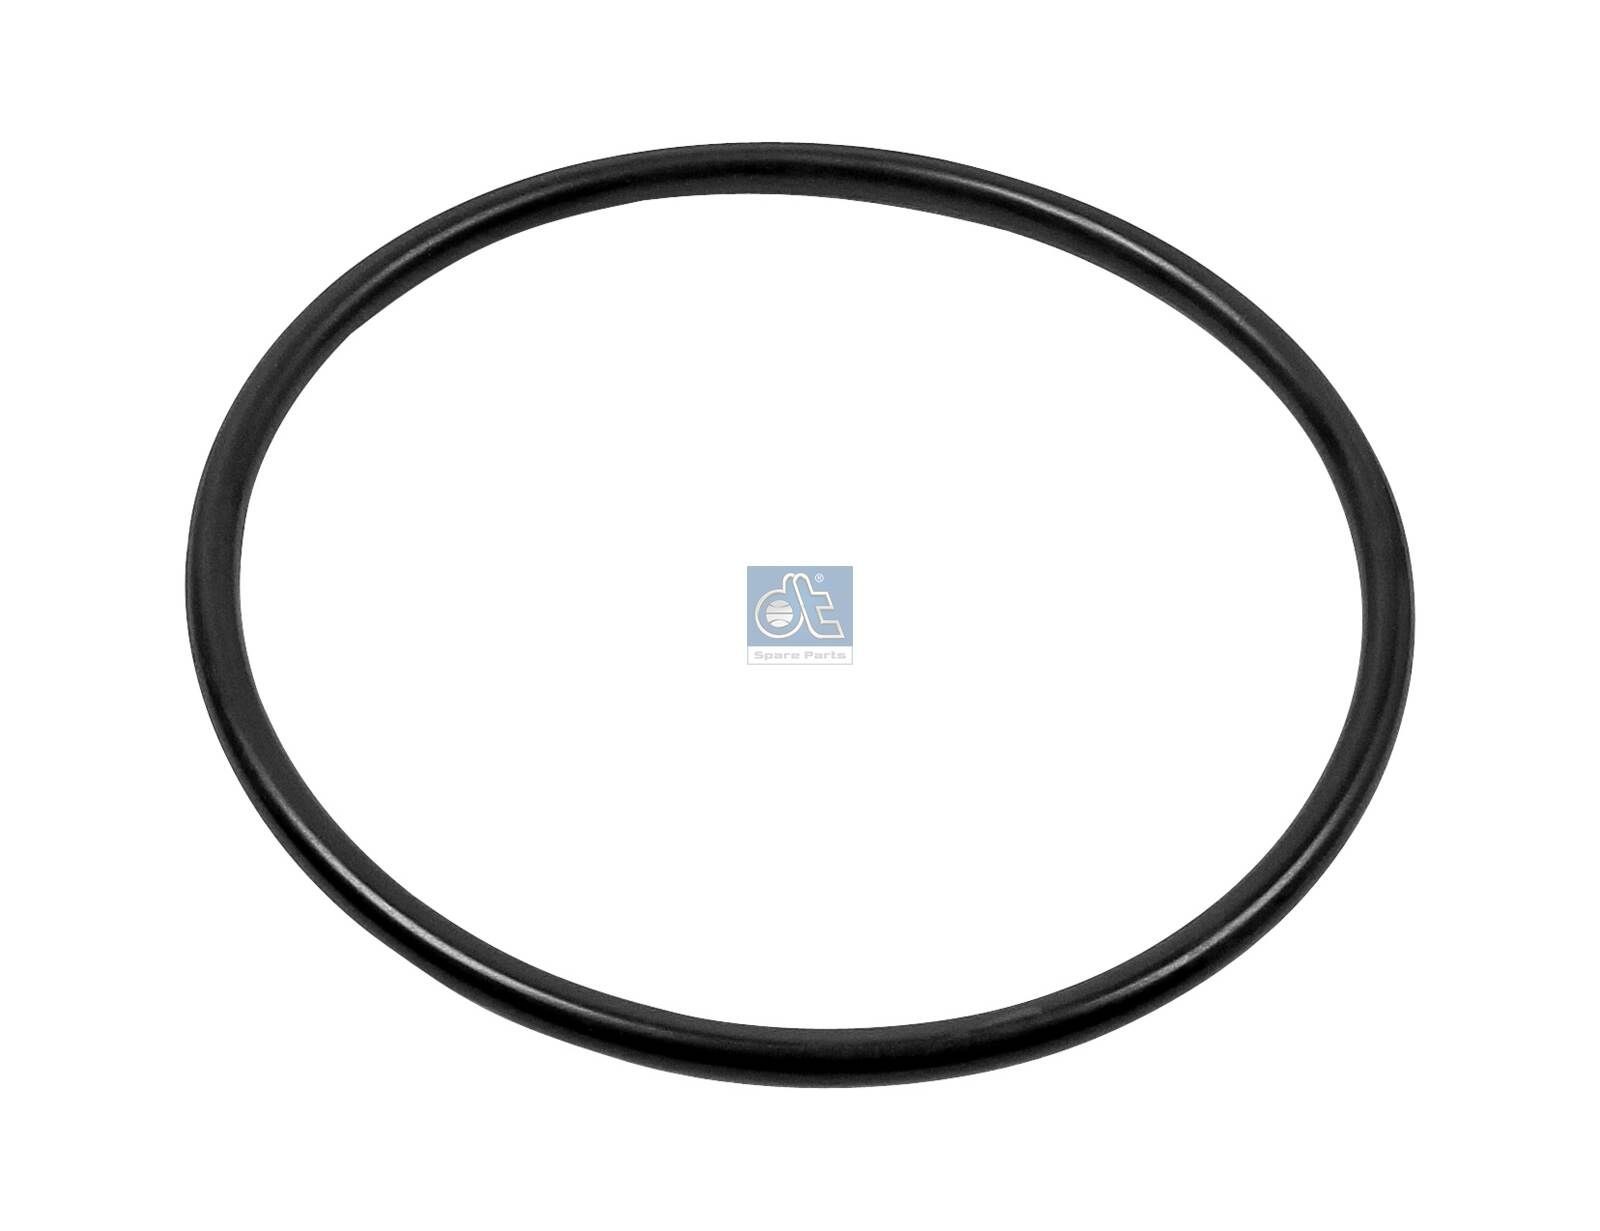 DT Spare Parts 109,2 x 5,7 mm, NBR (nitrile butadiene rubber) Seal Ring 3.89550 buy